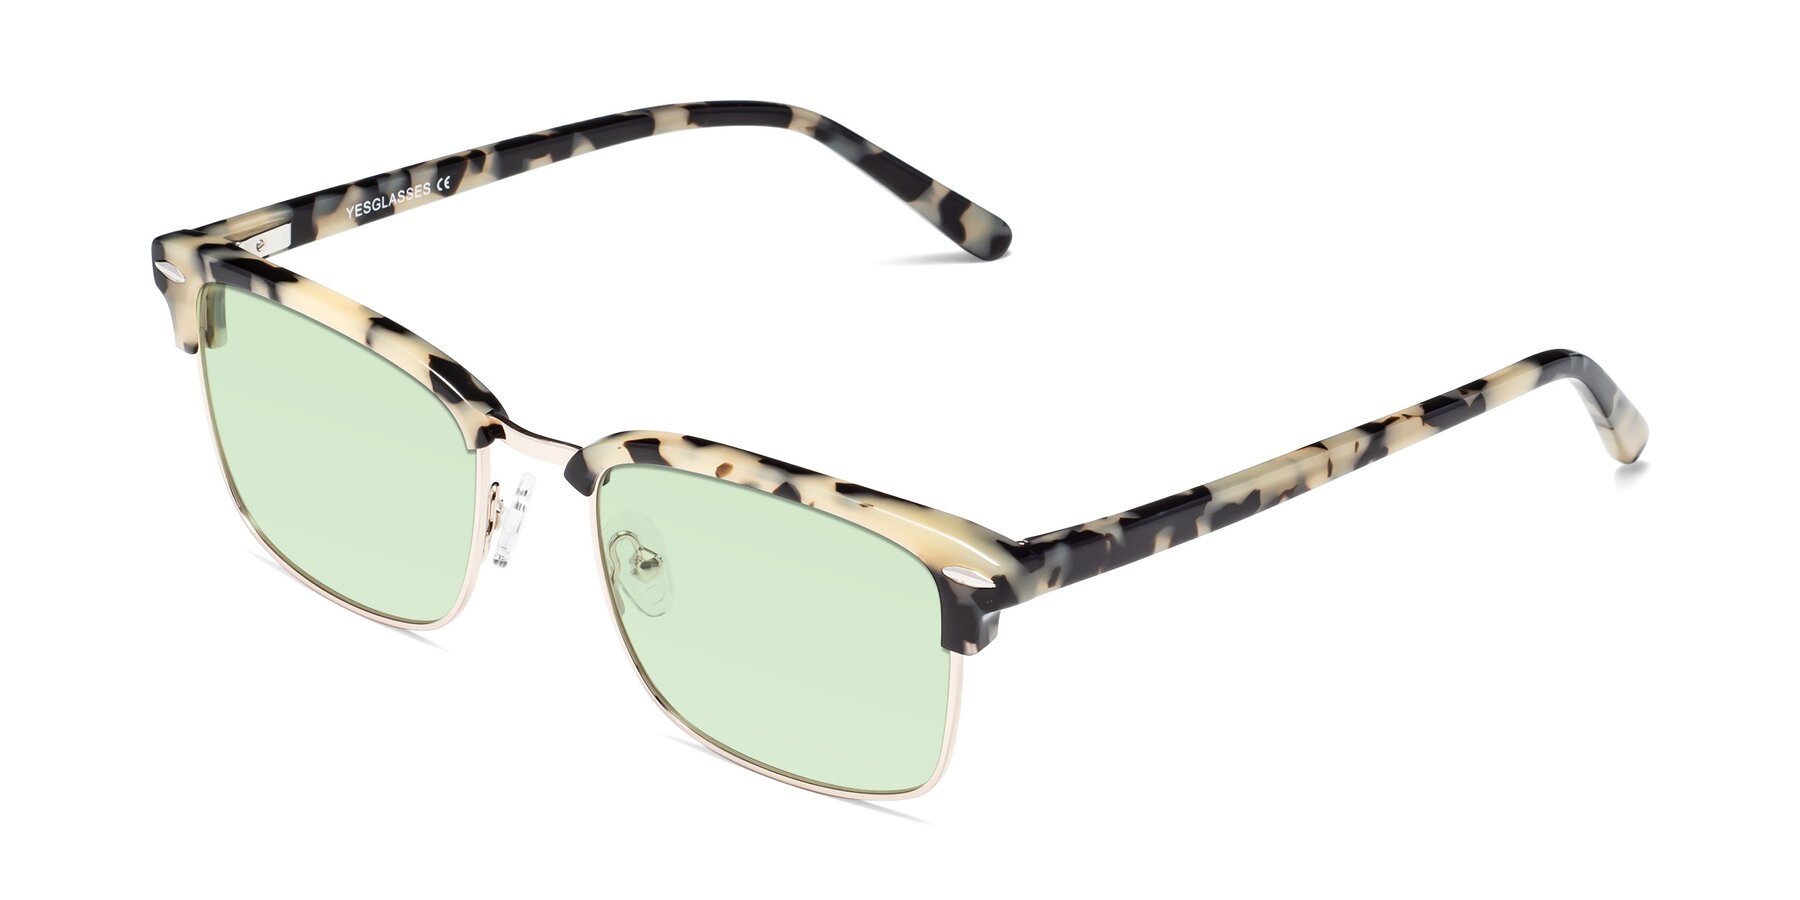 Angle of 17464 in Tortoise-Gold with Light Green Tinted Lenses